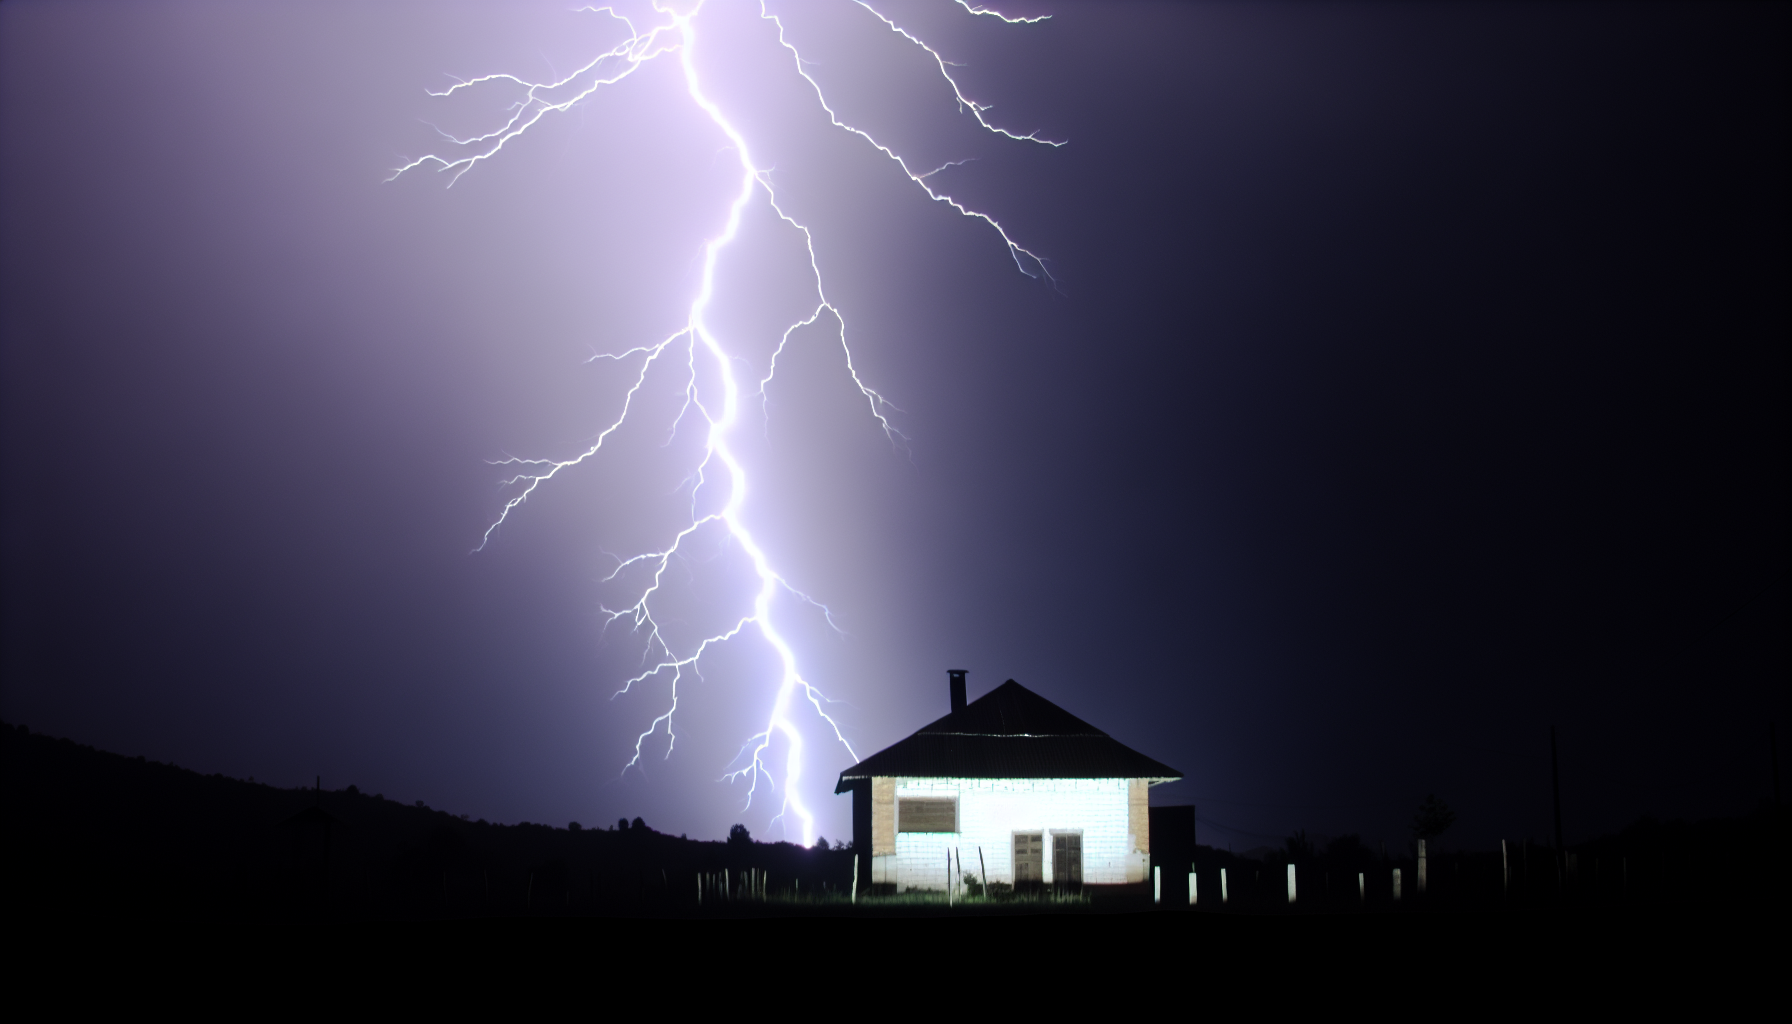 Image shows a lightning bolt striking in the background of an apartment building.